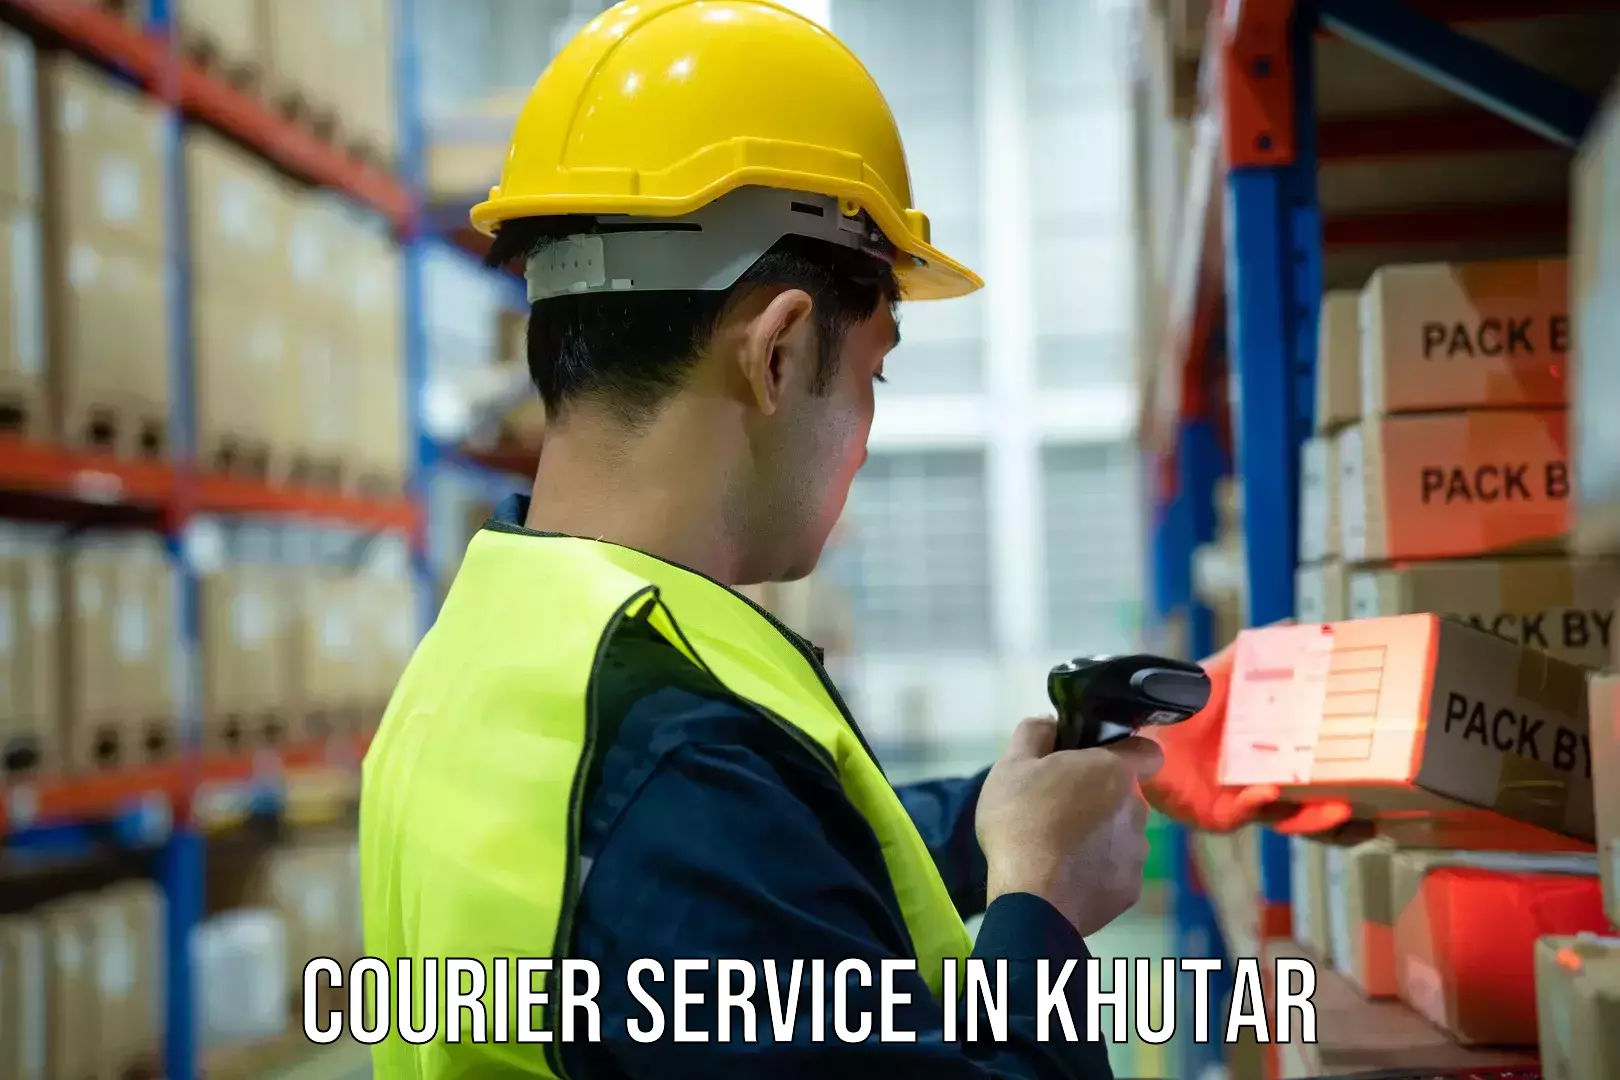 Affordable international shipping in Khutar